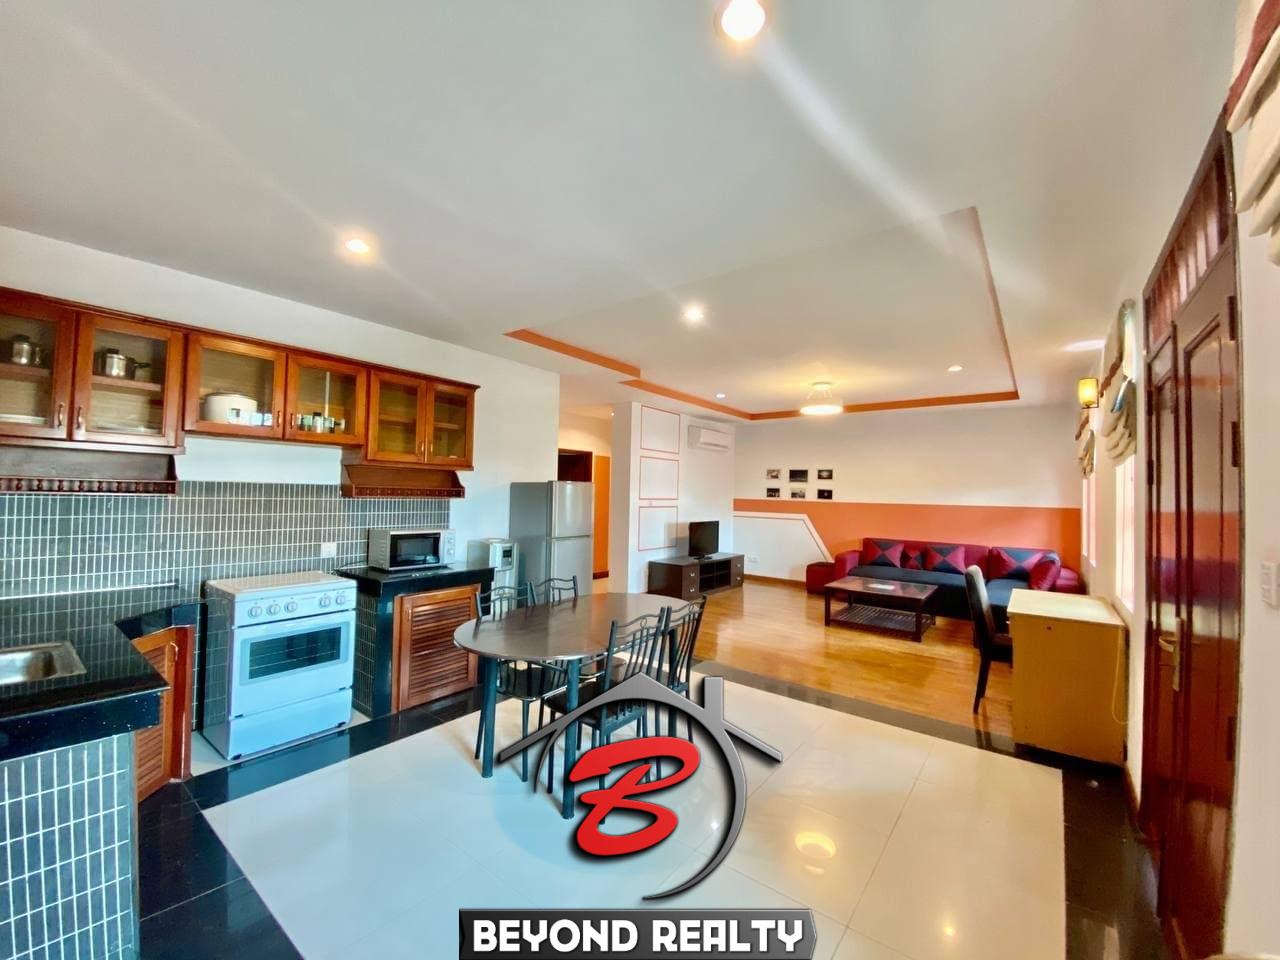 the living room and the kitchen of the 3-bedroom serviced flat for rent near Wat Phnom in Daun penh in Phnom Penh Cambodia